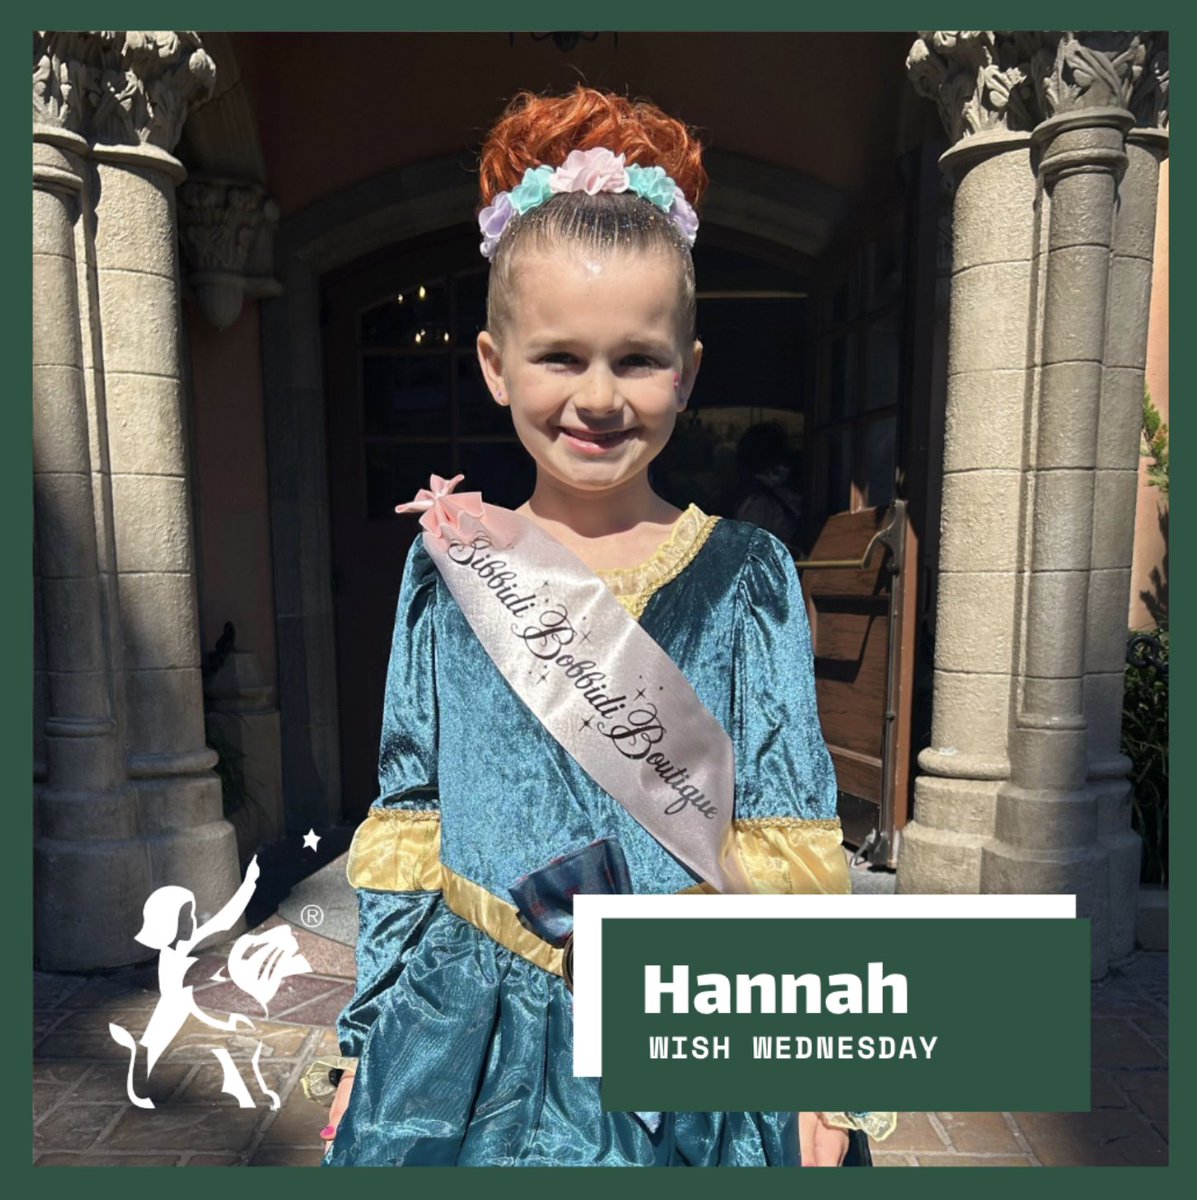 Hannah's wish was recently granted to go to Disney World. She certainly was treated like a princess! #MLFWishes #WishWednesday Help Grant a Wish: martylyonsfoundation.org/donate-today